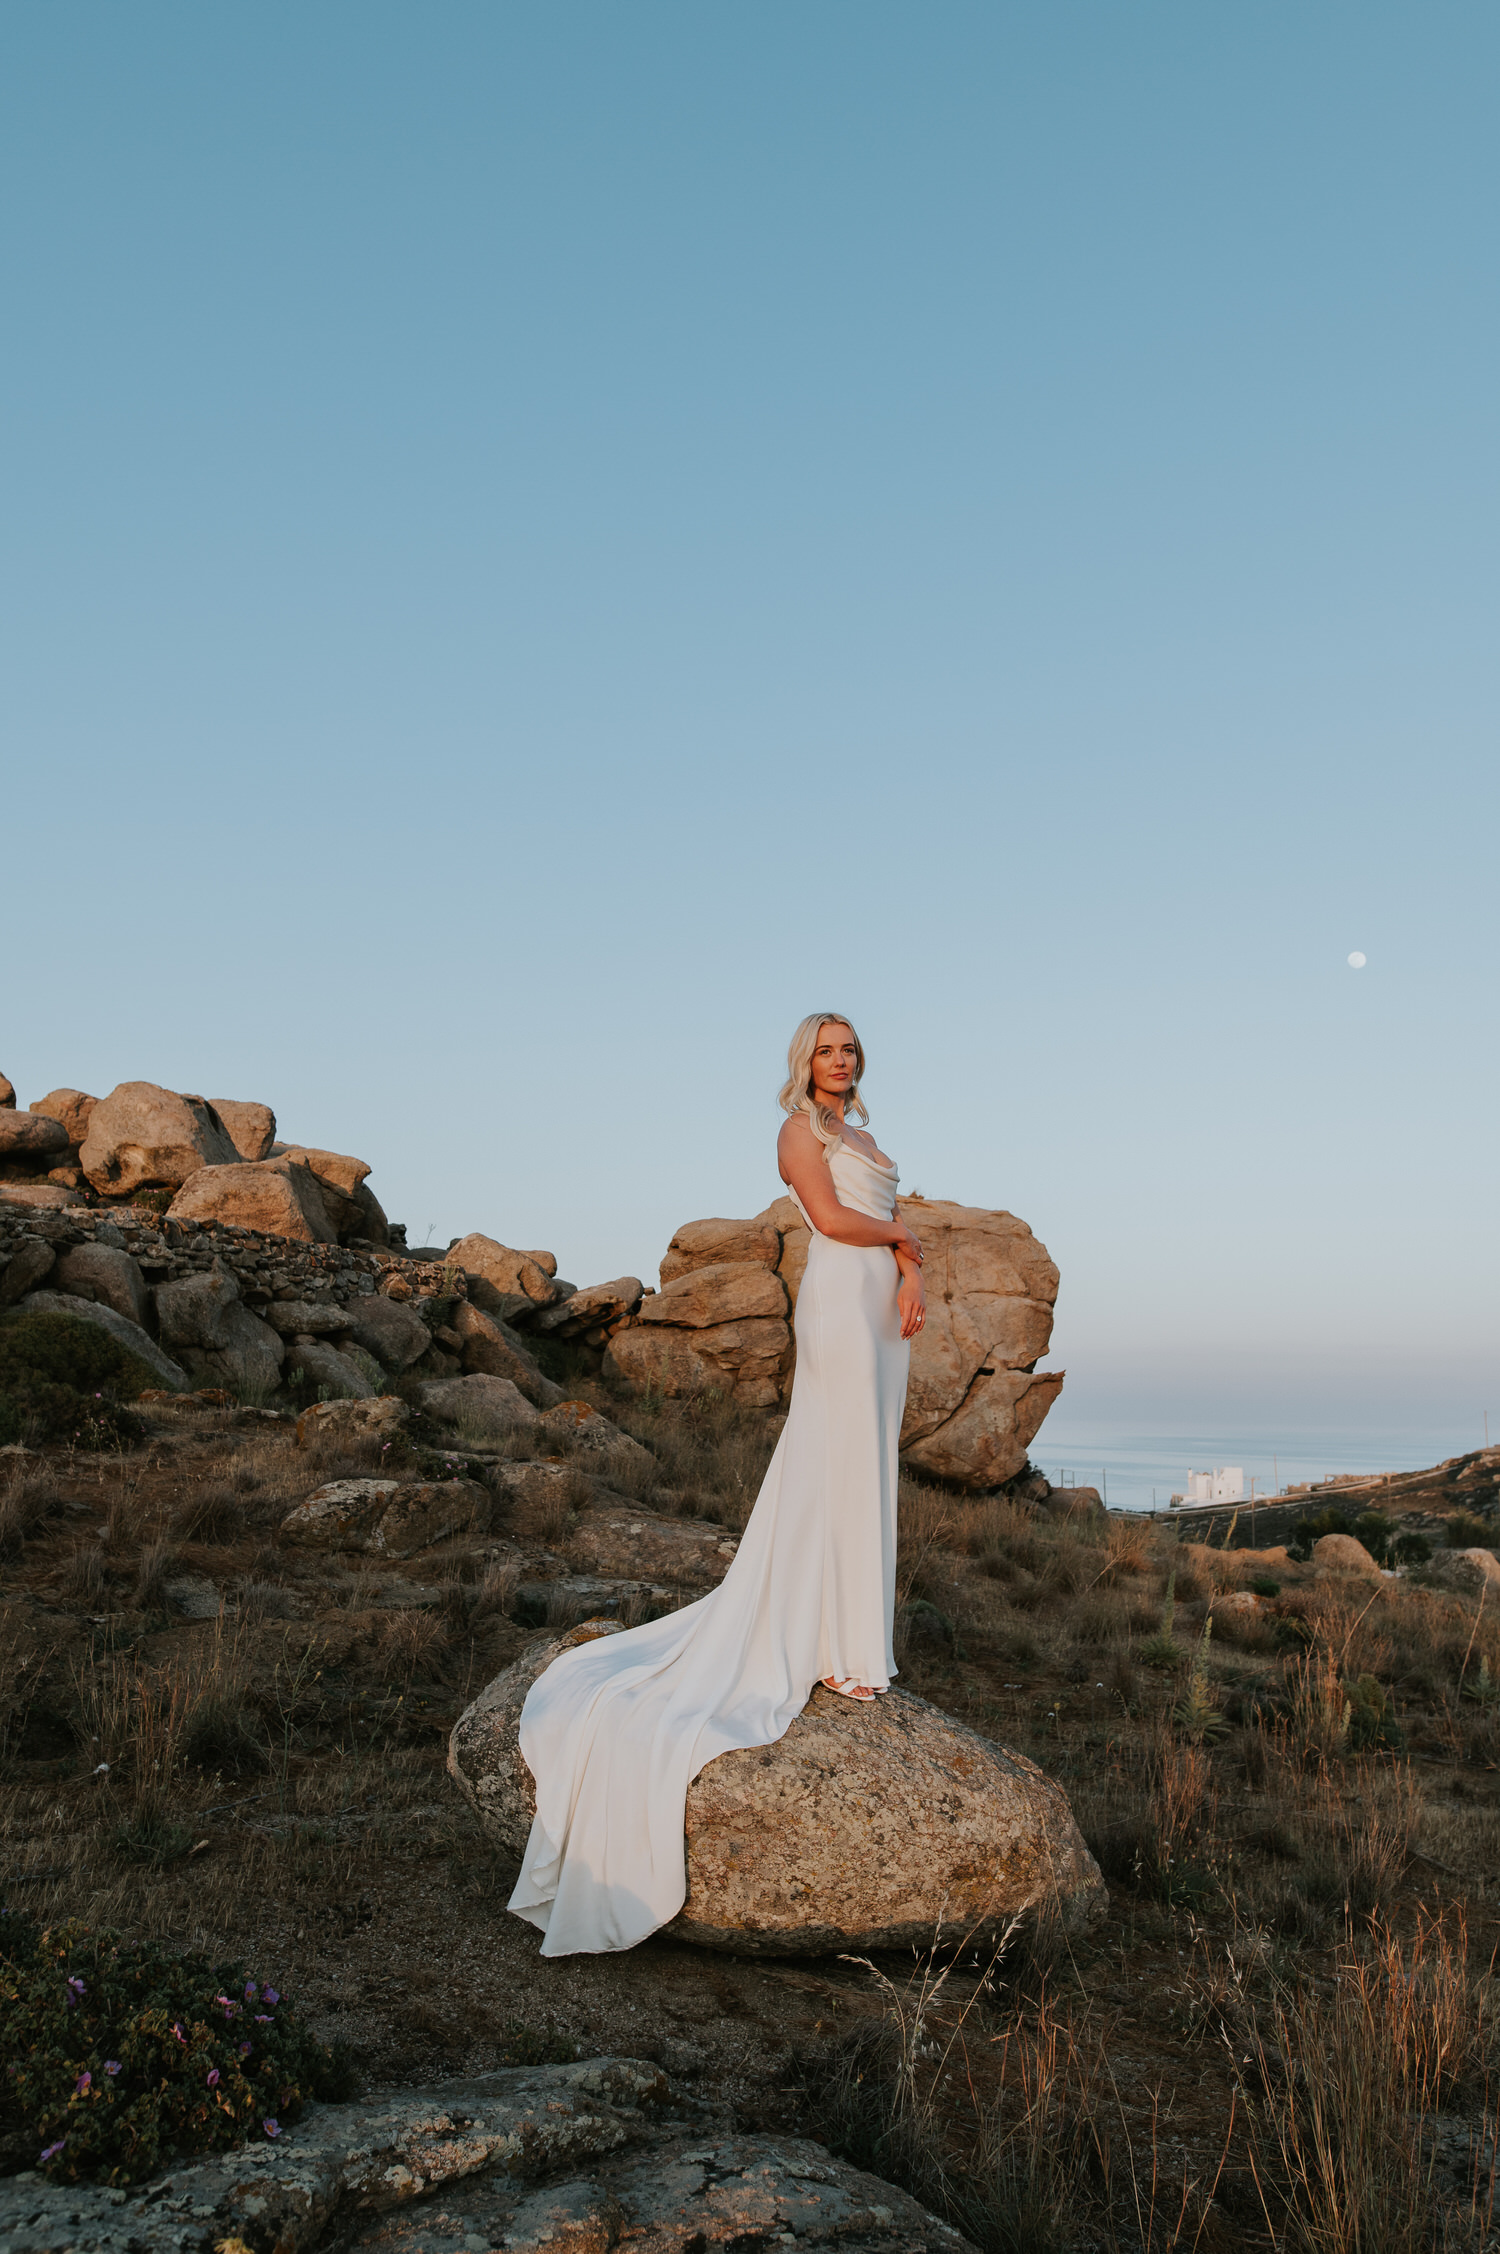 Mykonos wedding photographer: bride standing in her beautiful dress on the rock surrounded by the landscape with the moon in the background.